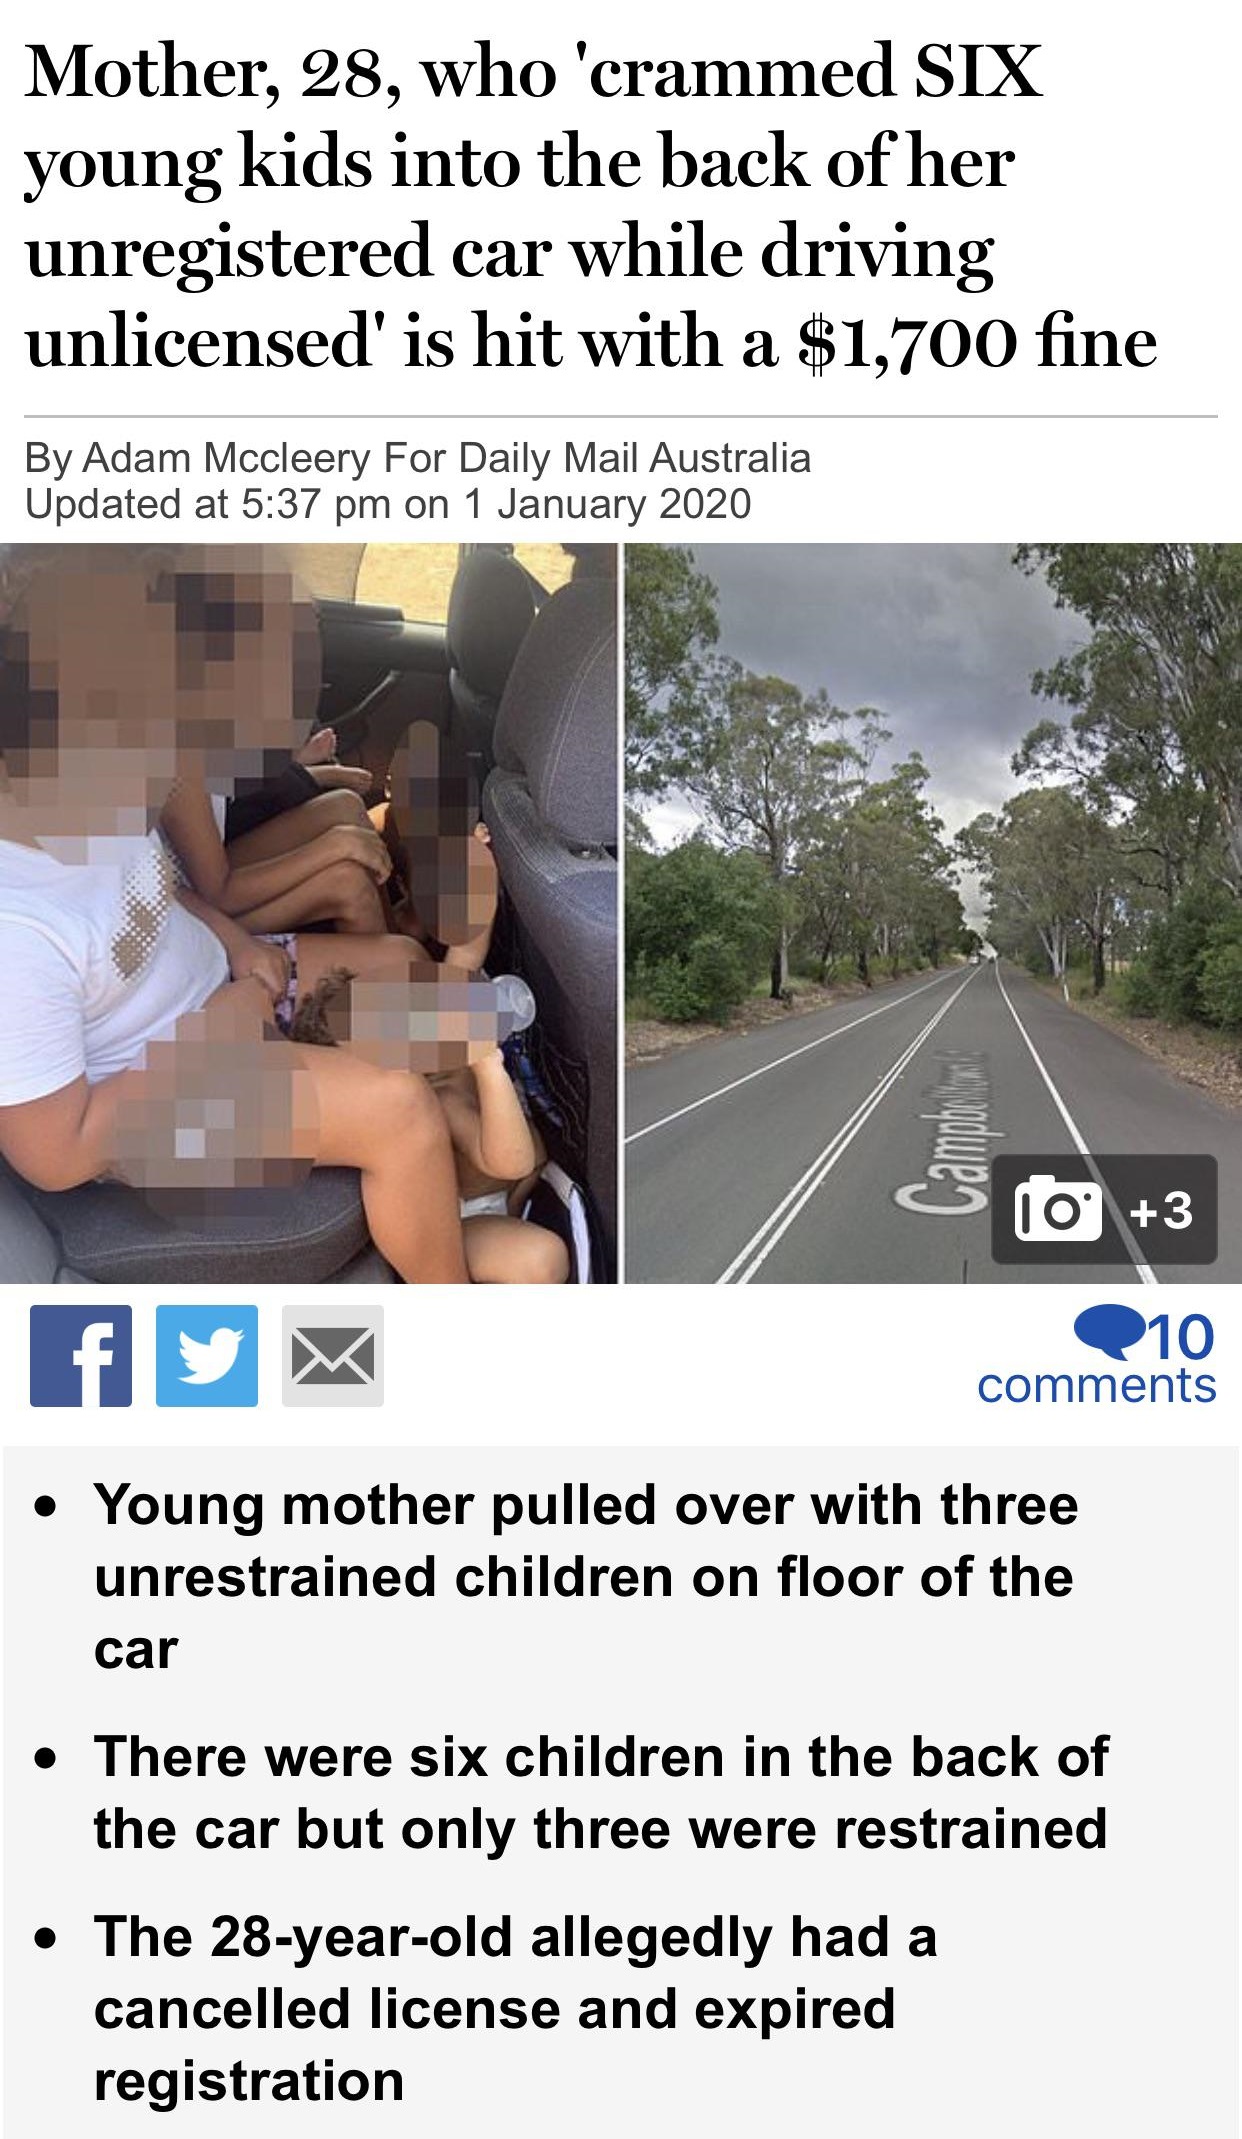 vehicle - Mother, 28, who 'crammed Six young kids into the back of her unregistered car while driving unlicensed' is hit with a $1,700 fine By Adam Mccleery For Daily Mail Australia Updated at on 810 3 fy 10 Young mother pulled over with three unrestraine